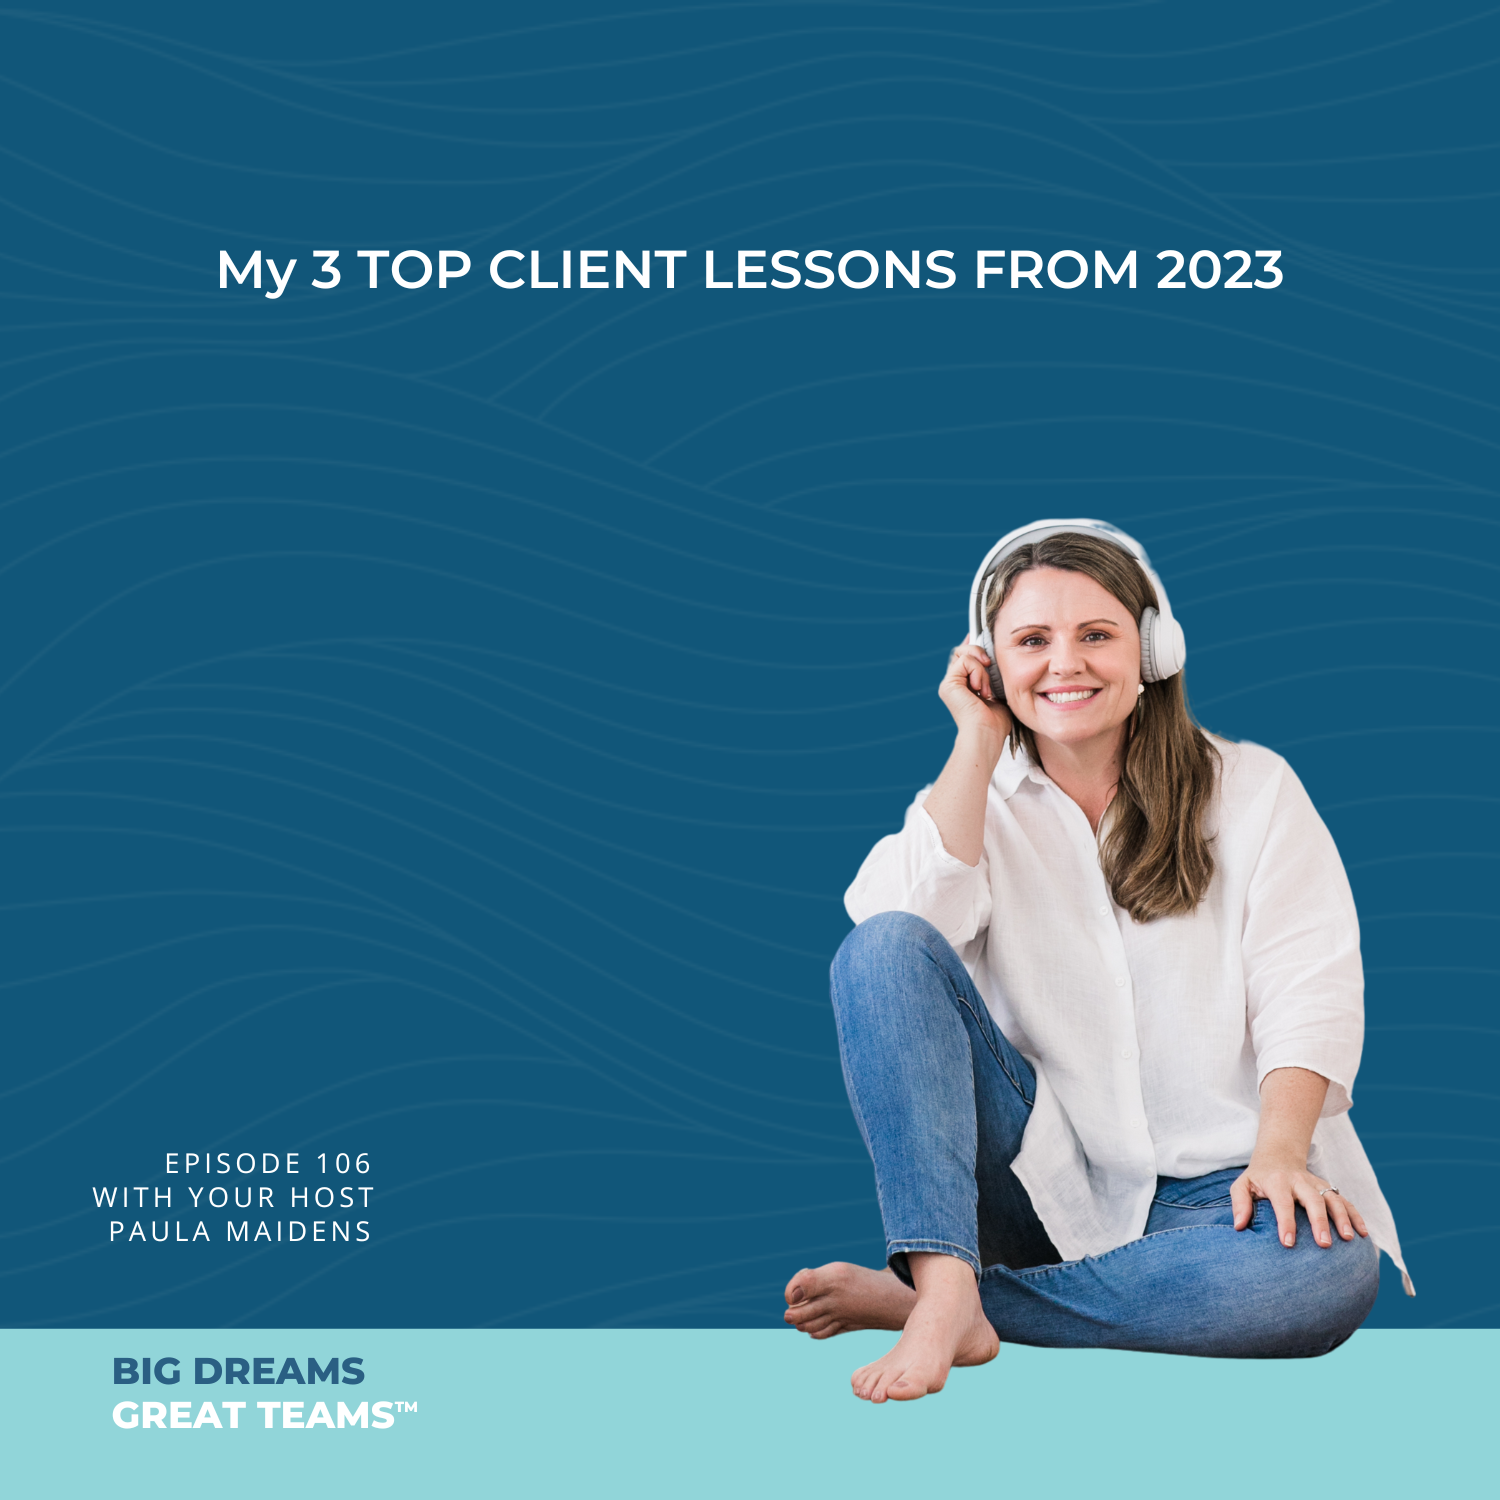 Paula Maidens - Episode #106 - My 3 Top Client Lessons From 2023